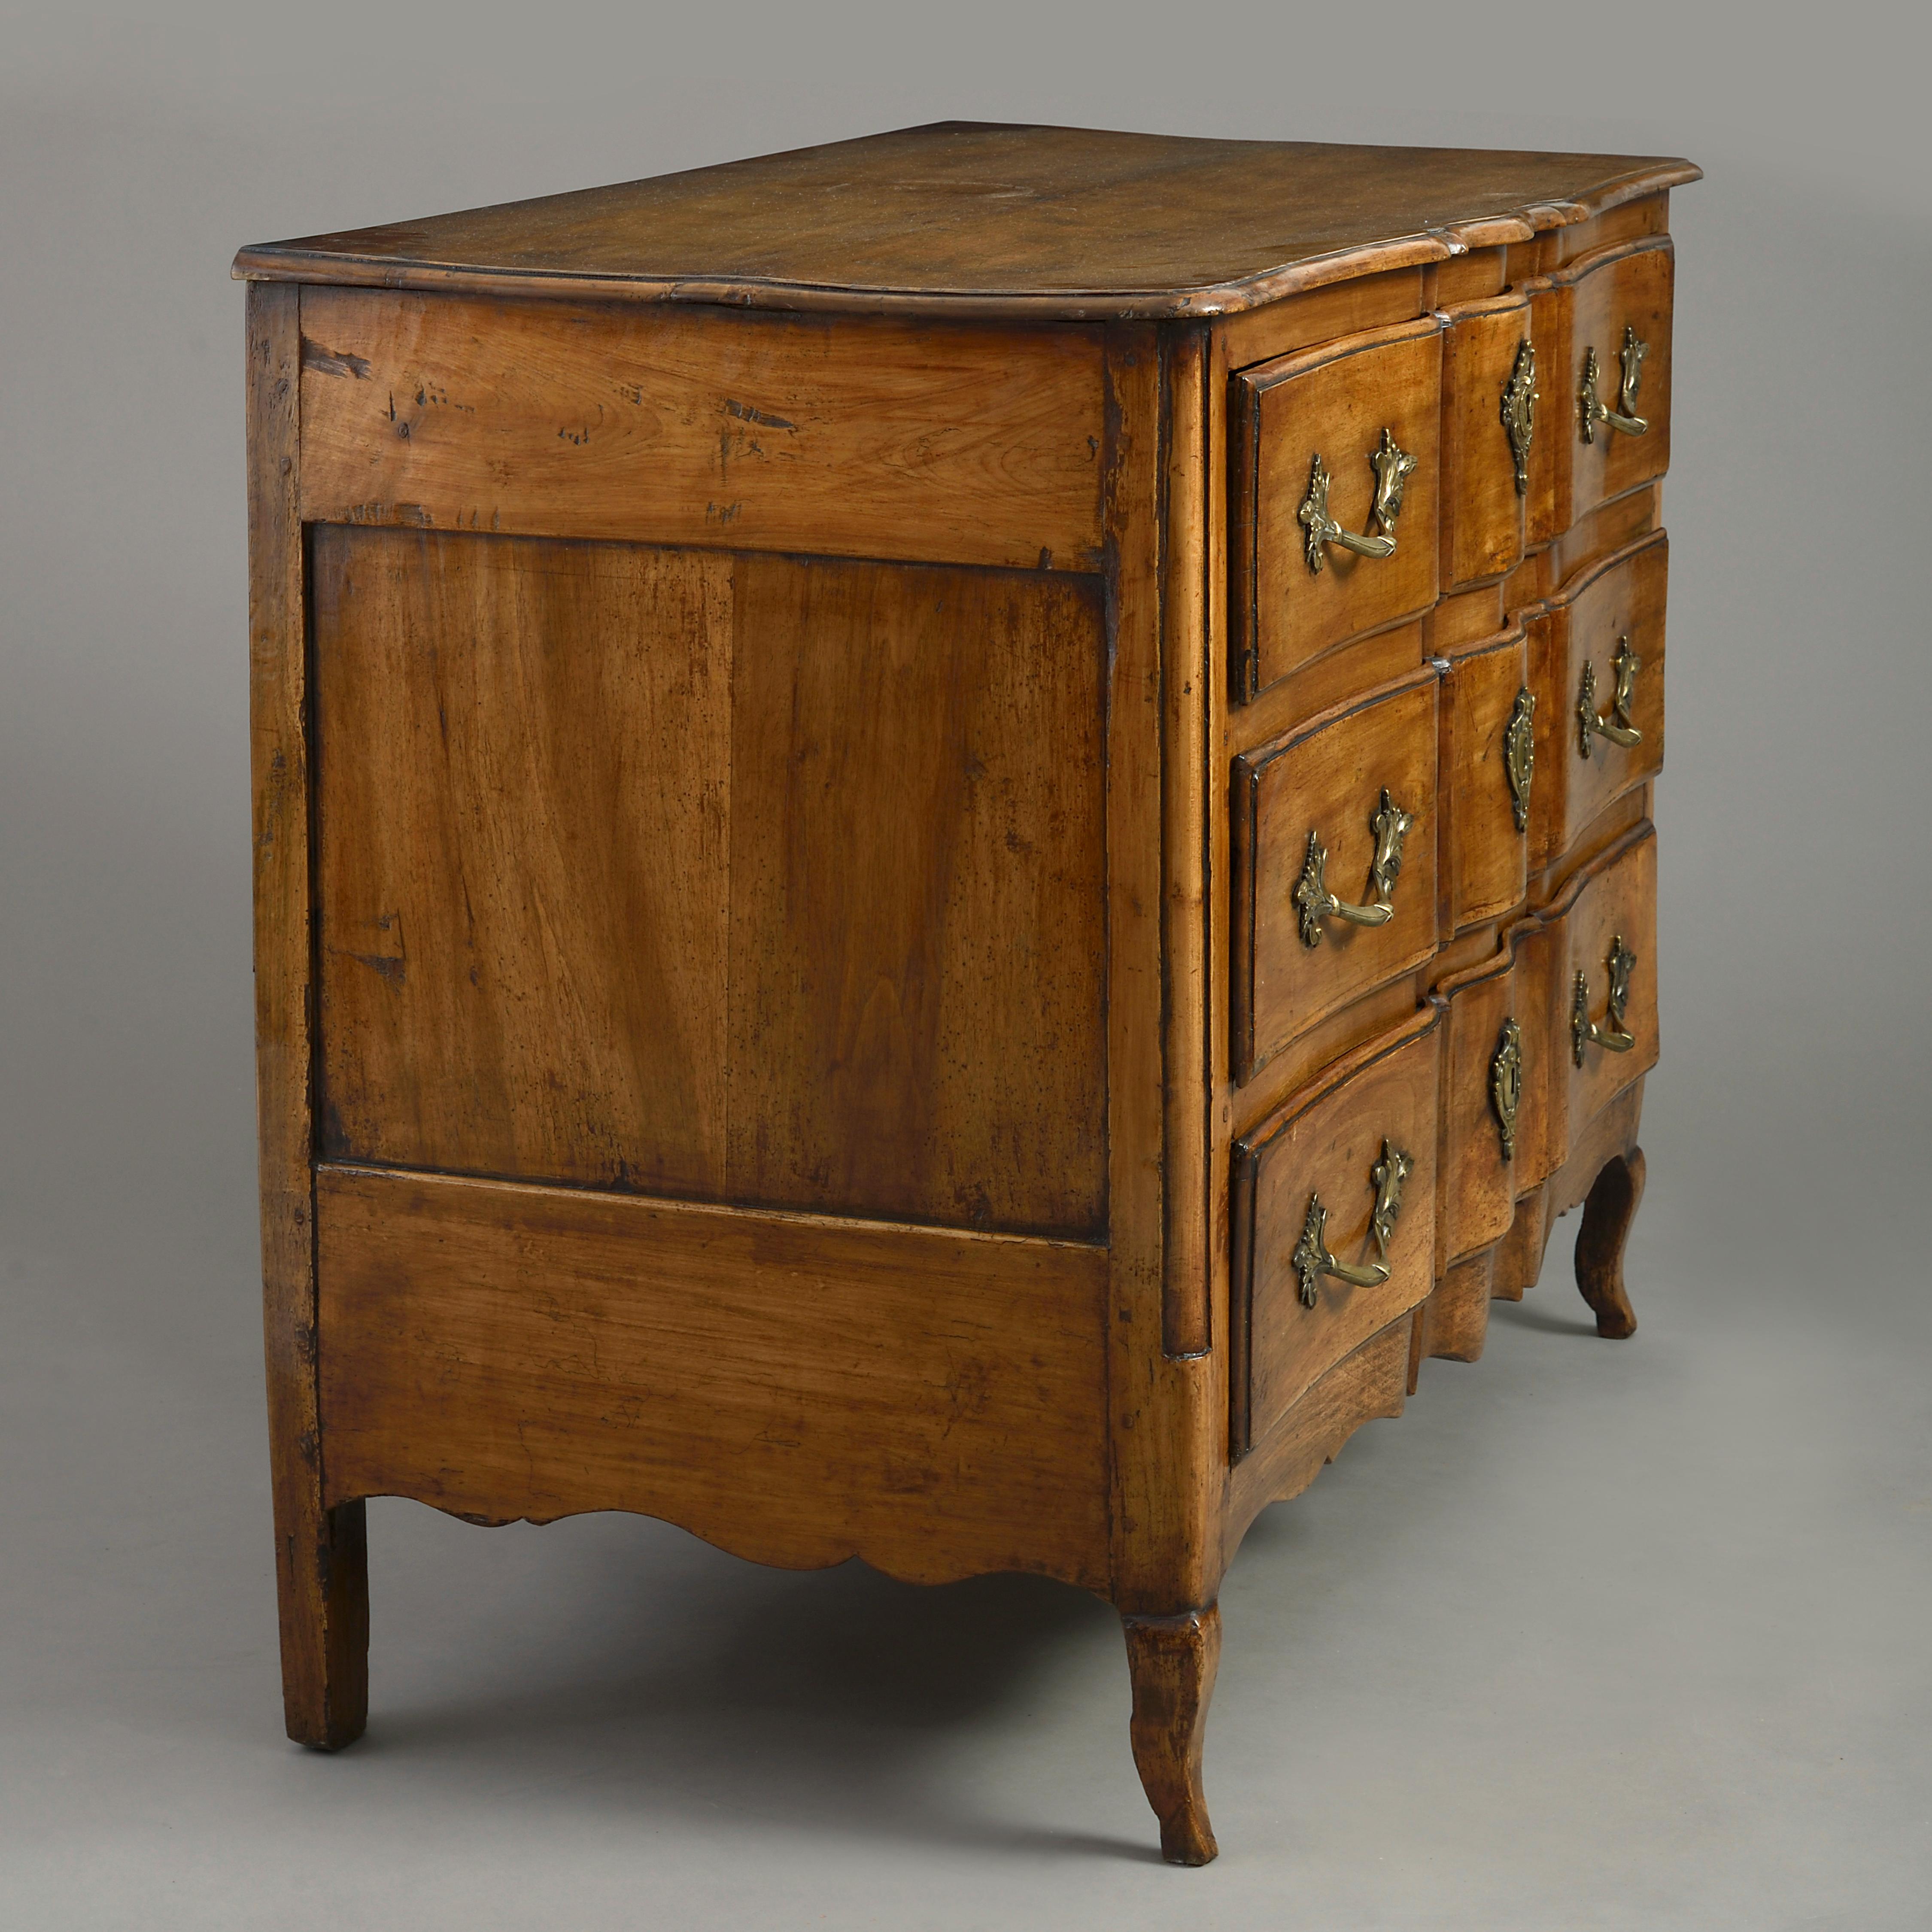 French Mid-18th Century Louis XV Period Walnut Commode